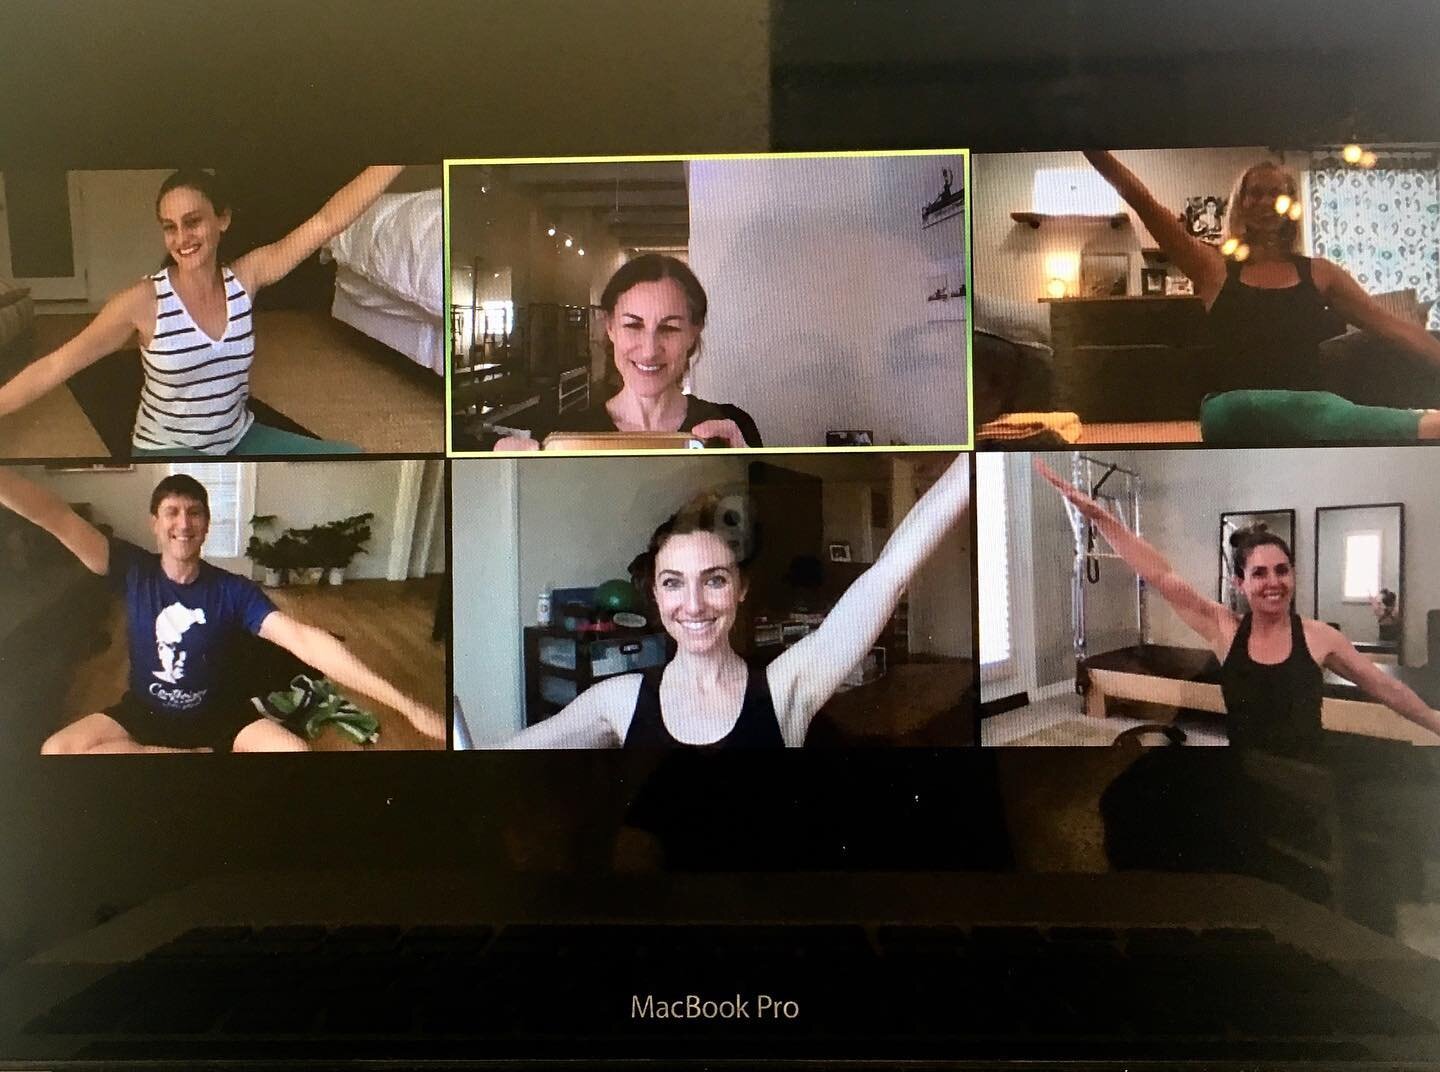 Bam! Verbal Cueing Workshop finished, time for a silly photo!  #pilatesworkshops #onlineteaching #classicalpilates #zoepilates